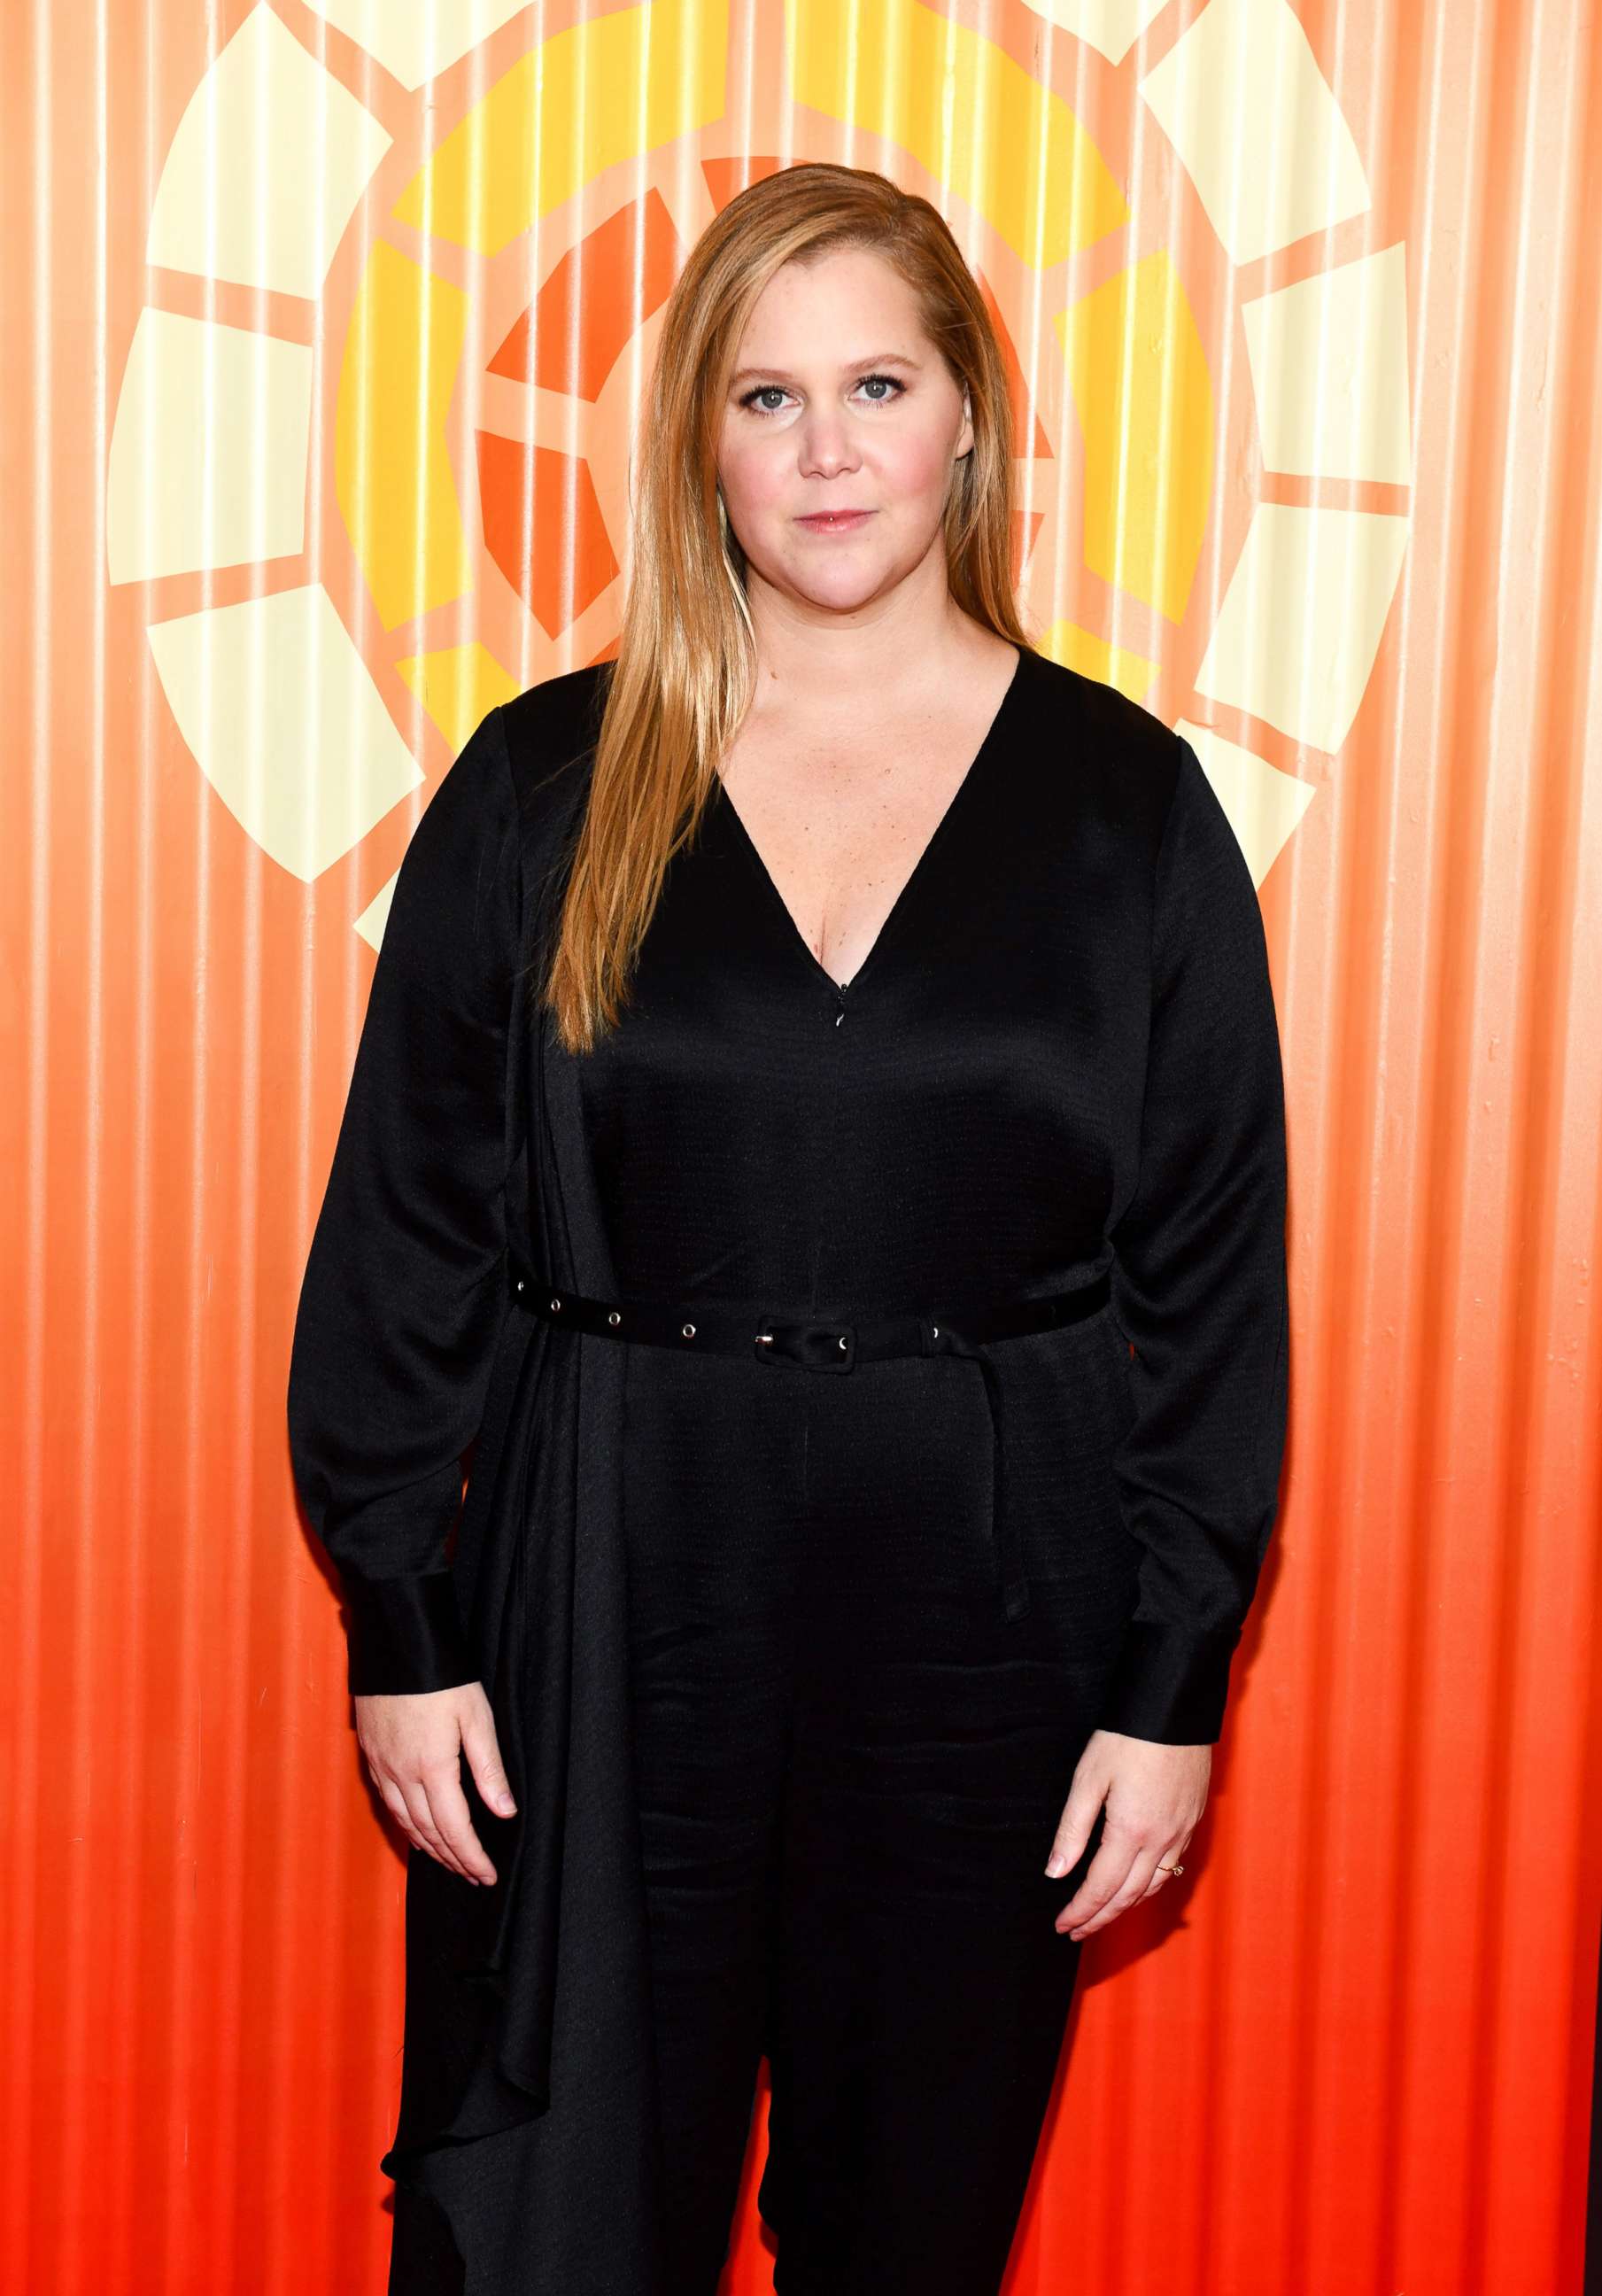 PHOTO: Amy Schumer attends a fundraiser in New York, Nov. 12, 2019.